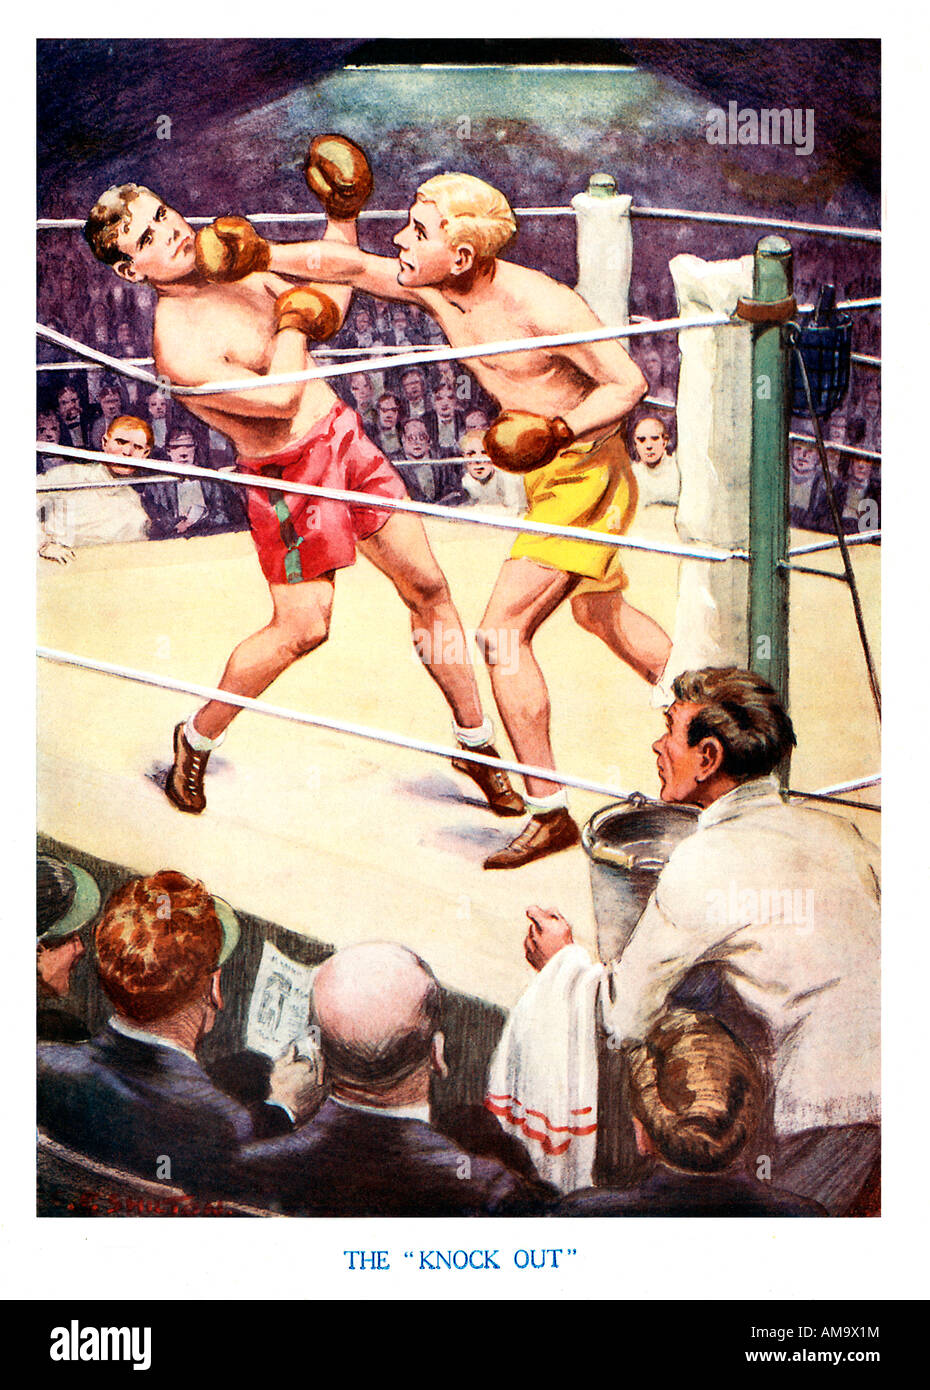 Knock Out 1920s boys magazine illustration of a boxing match where a straight right to the jaw does the trick with a knock out punch Stock Photo